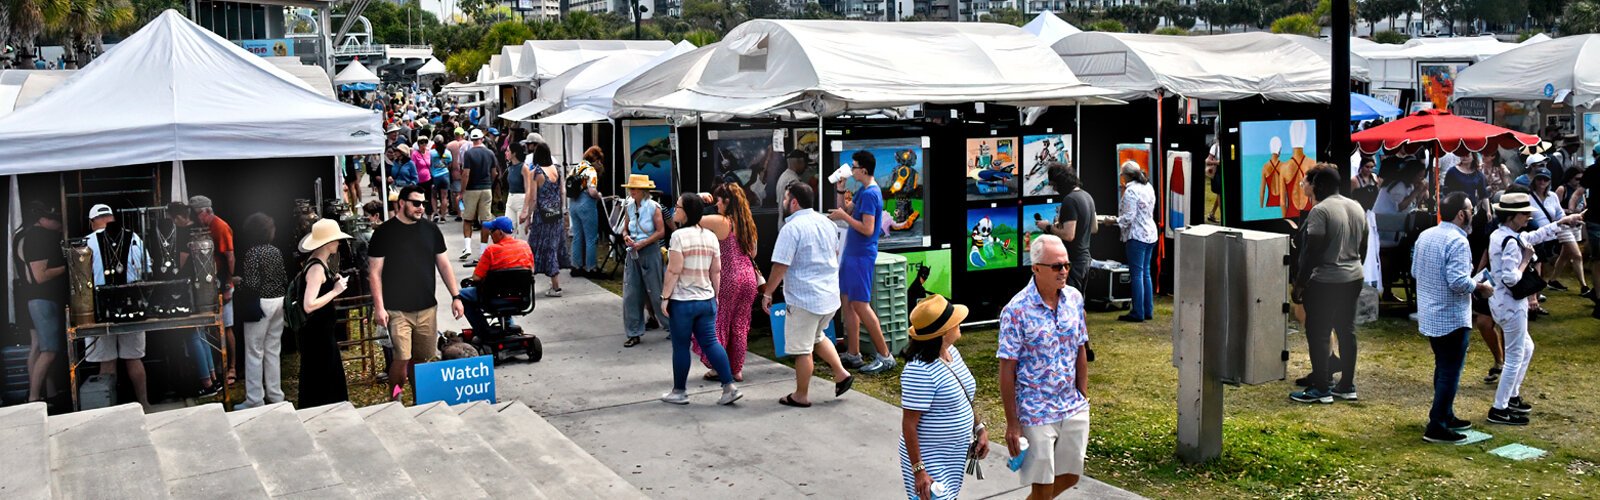 The 53rd annual Raymond James Gasparilla Festival of the Arts (GFA) drew an estimated crowd of 30,000 to Julian B. Lane Riverfront Park in Tampa on March 4th and 5th.